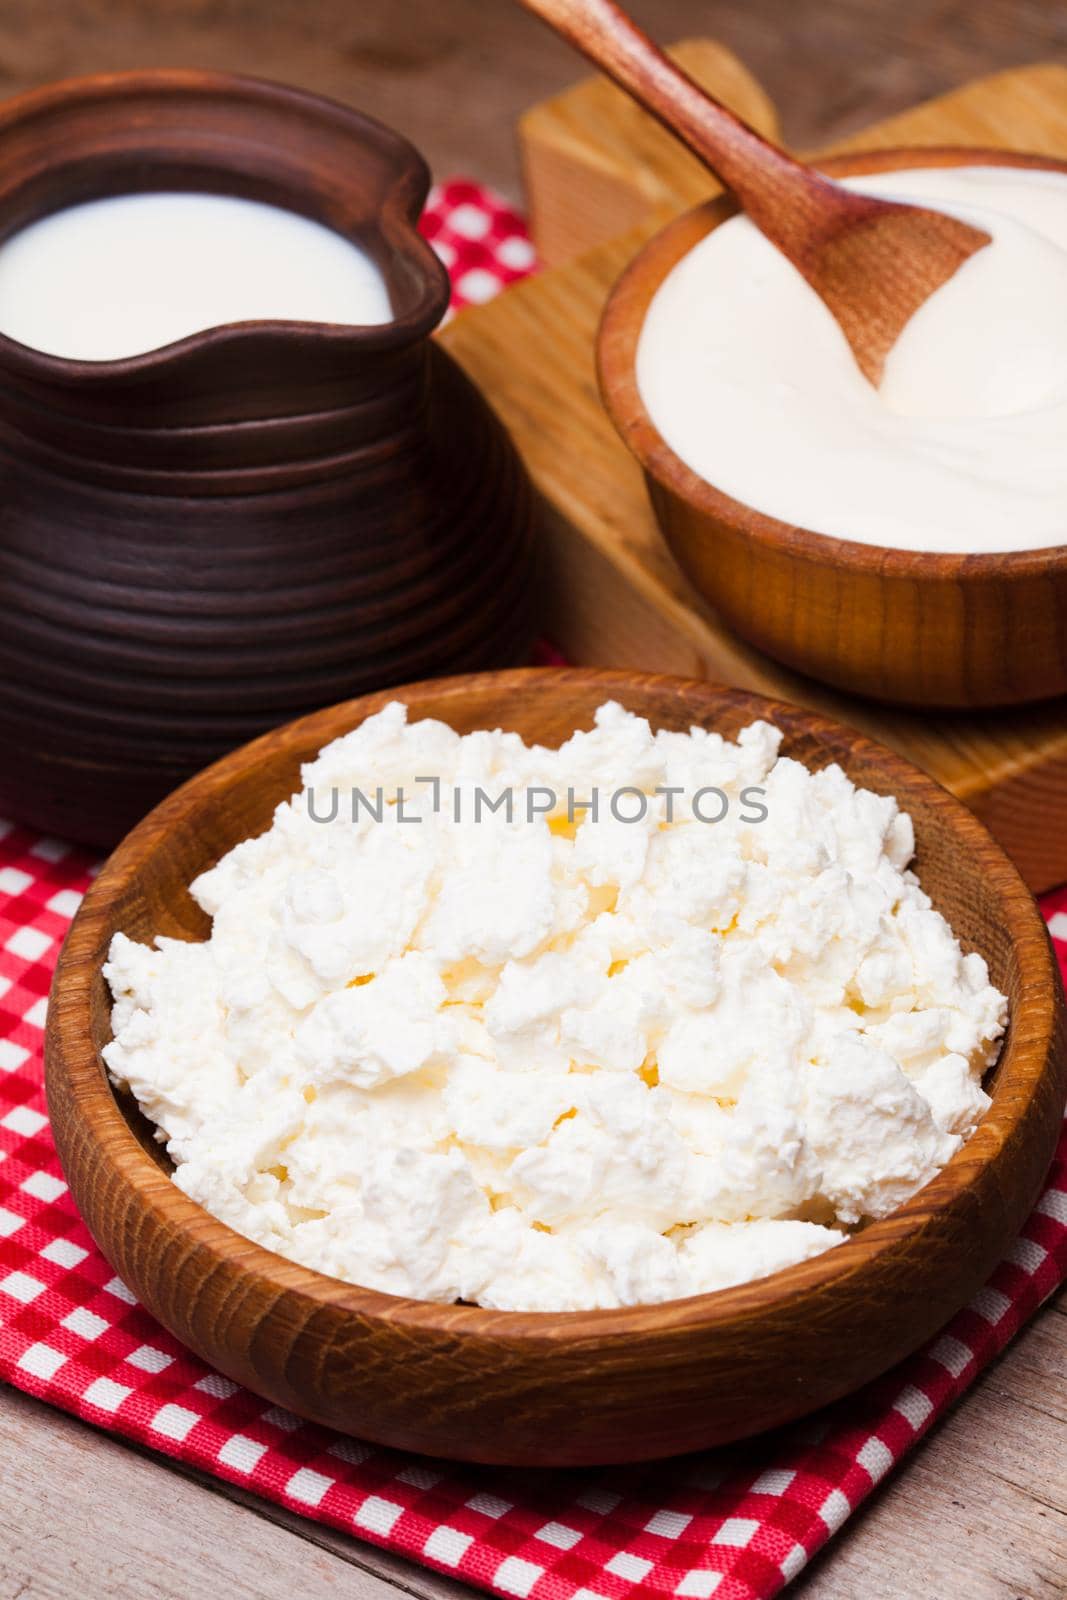 Sour cream and curd on a wooden rustic board